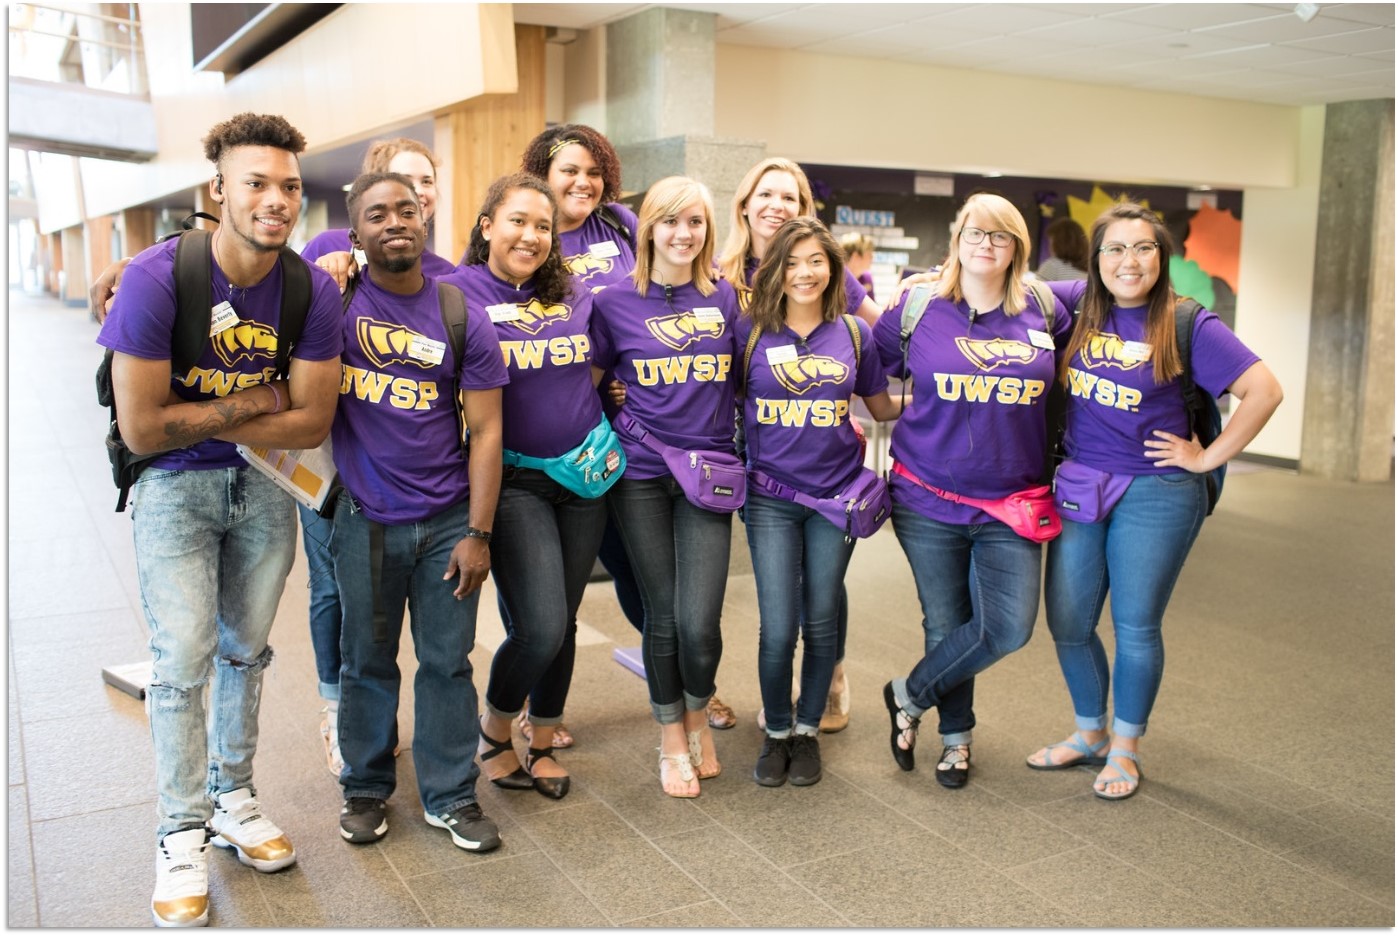 UWSP students in T-shirts